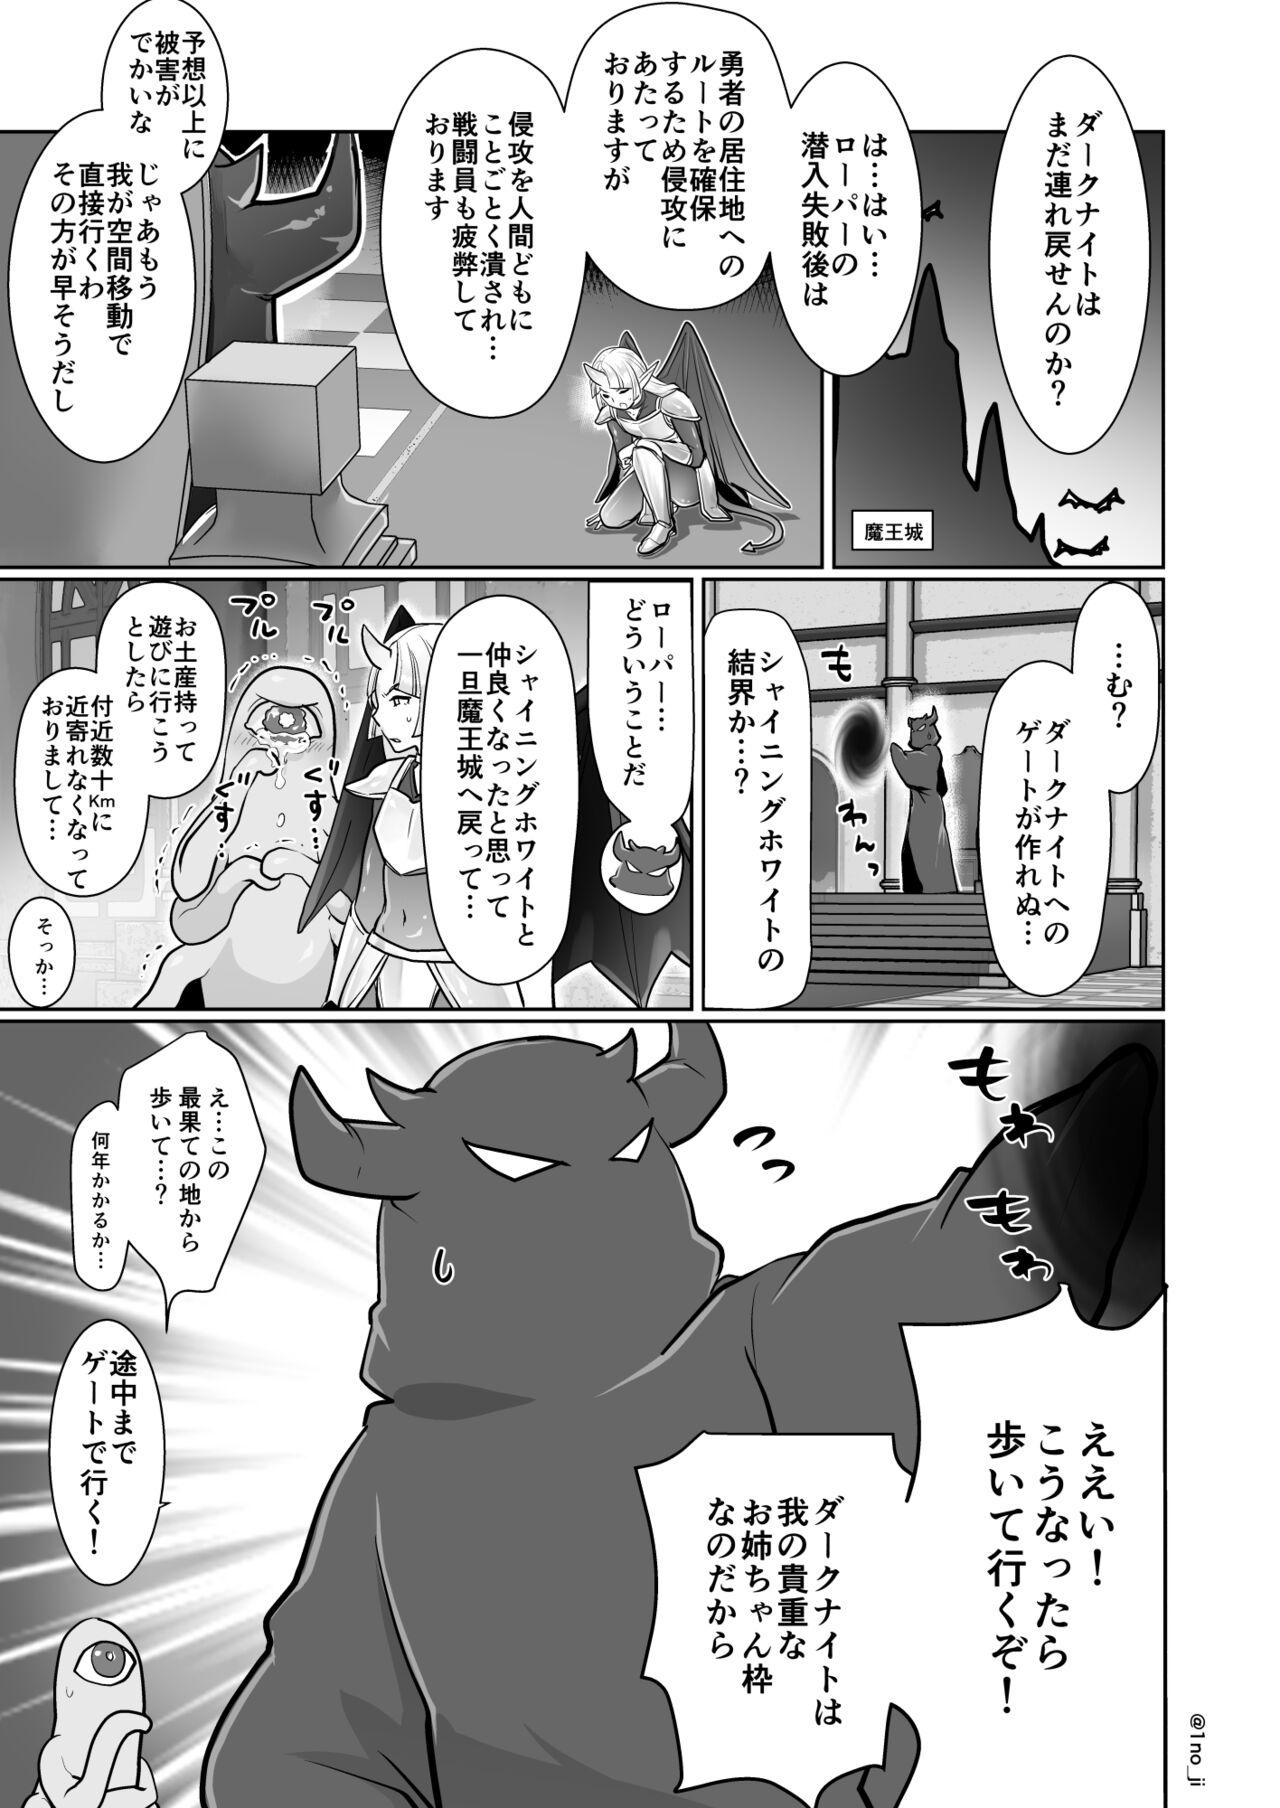 Couch 魔王軍の元幹部♂が勇者に負けてメスにされる話2【ダークナイトさんシリーズ】 - Original Groping - Picture 2